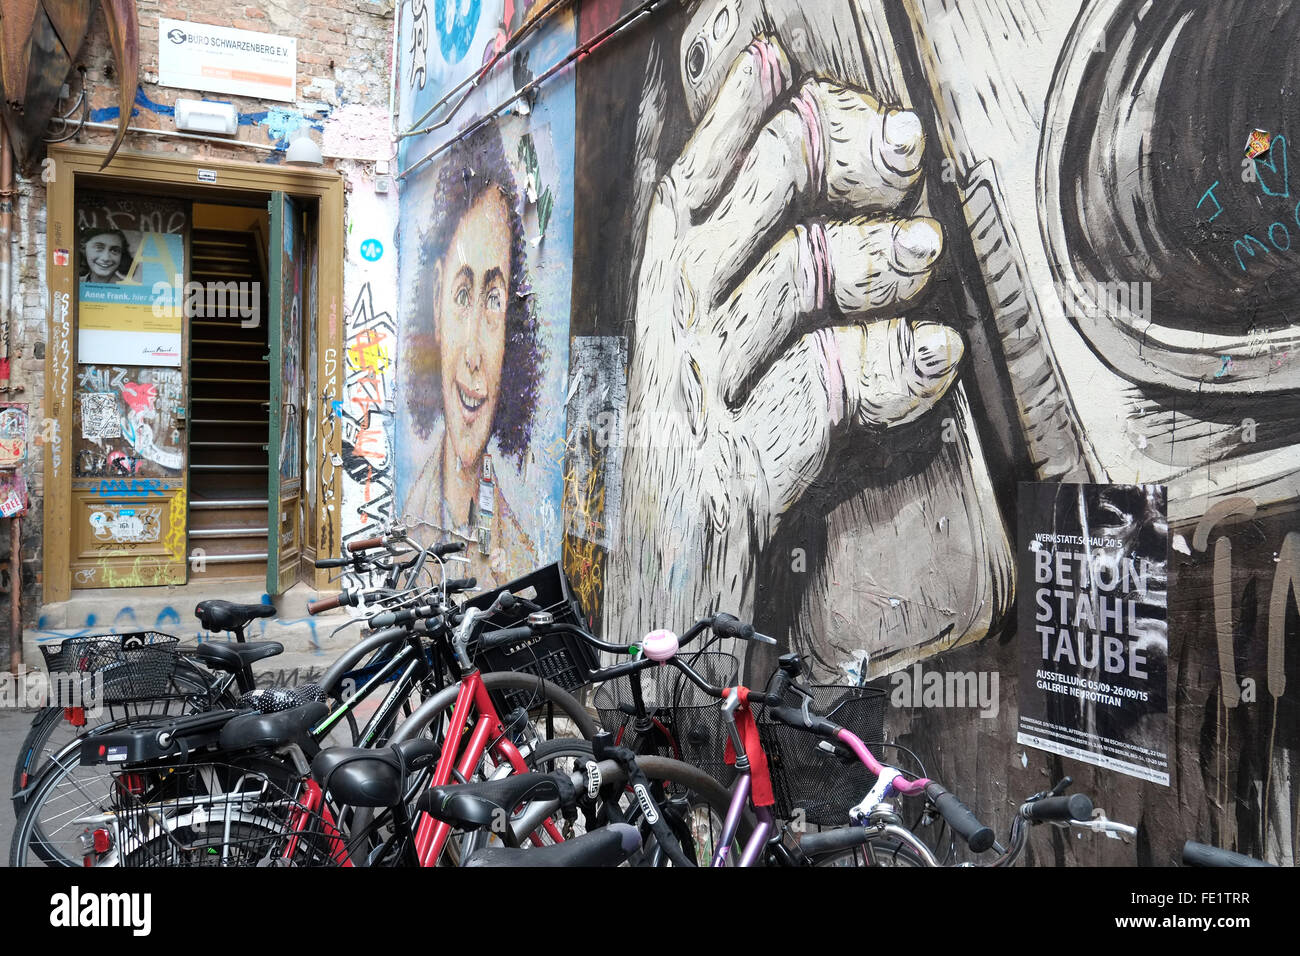 Street art outside the Anne Frank Centre, Berlin, Germany. This image shows the entrance to the Centre. Stock Photo